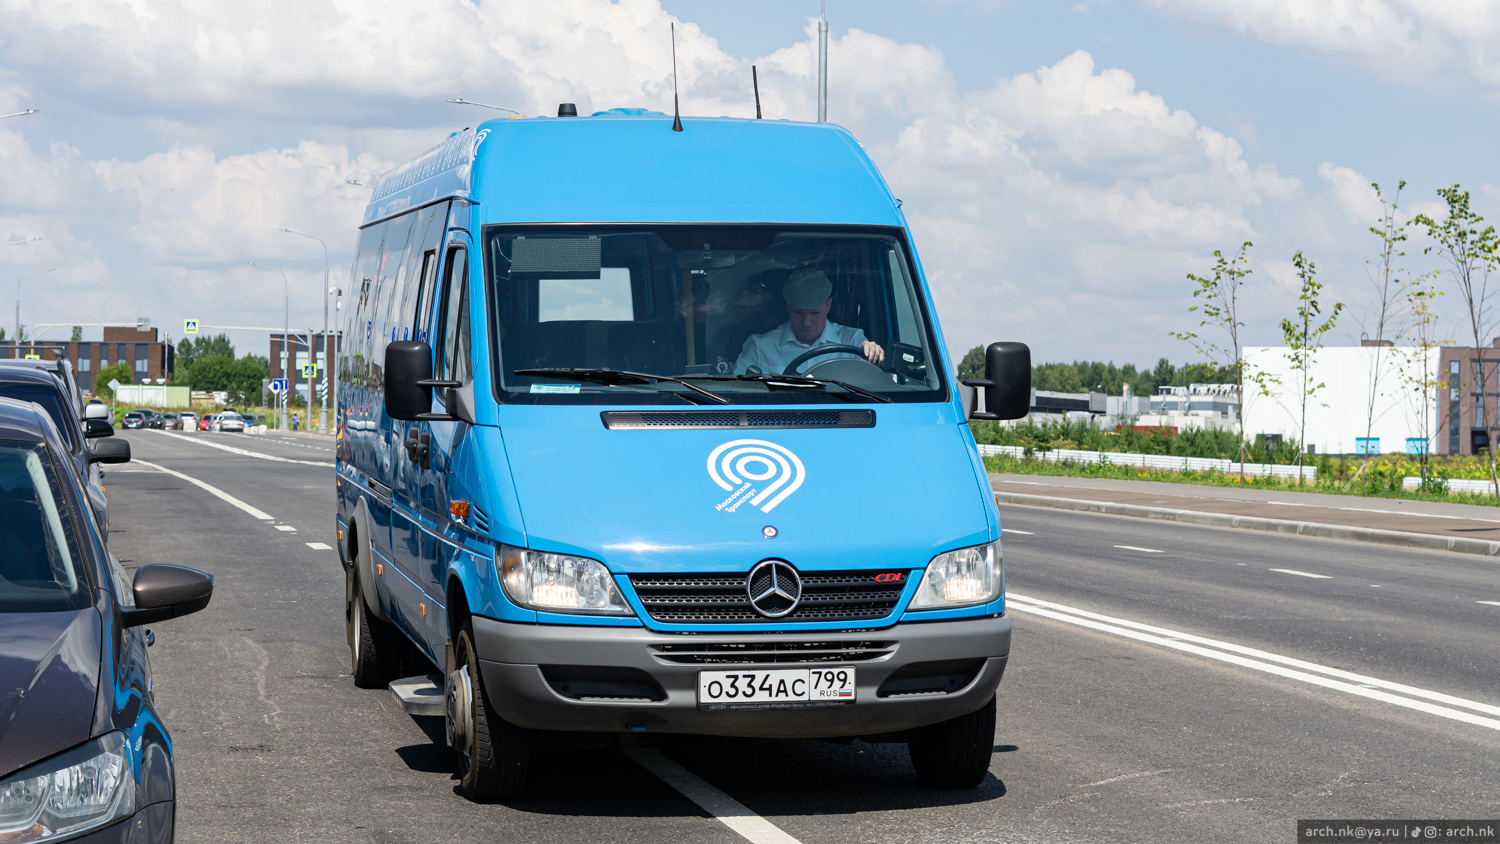 Moscow, Luidor-223206 (MB Sprinter Classic) # 010099